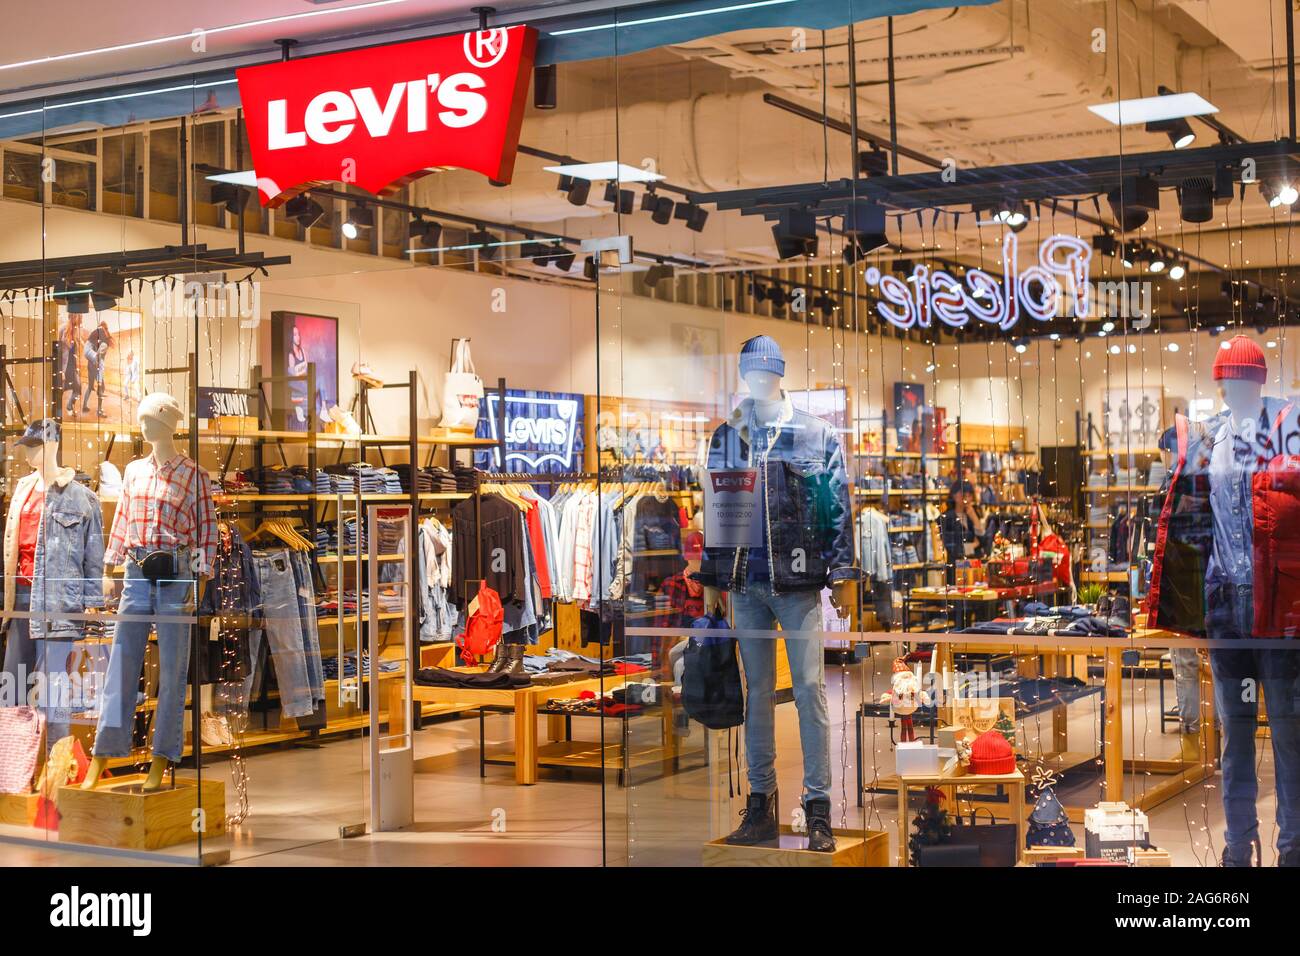 Levis Brand High Resolution Stock Photography and Images - Alamy